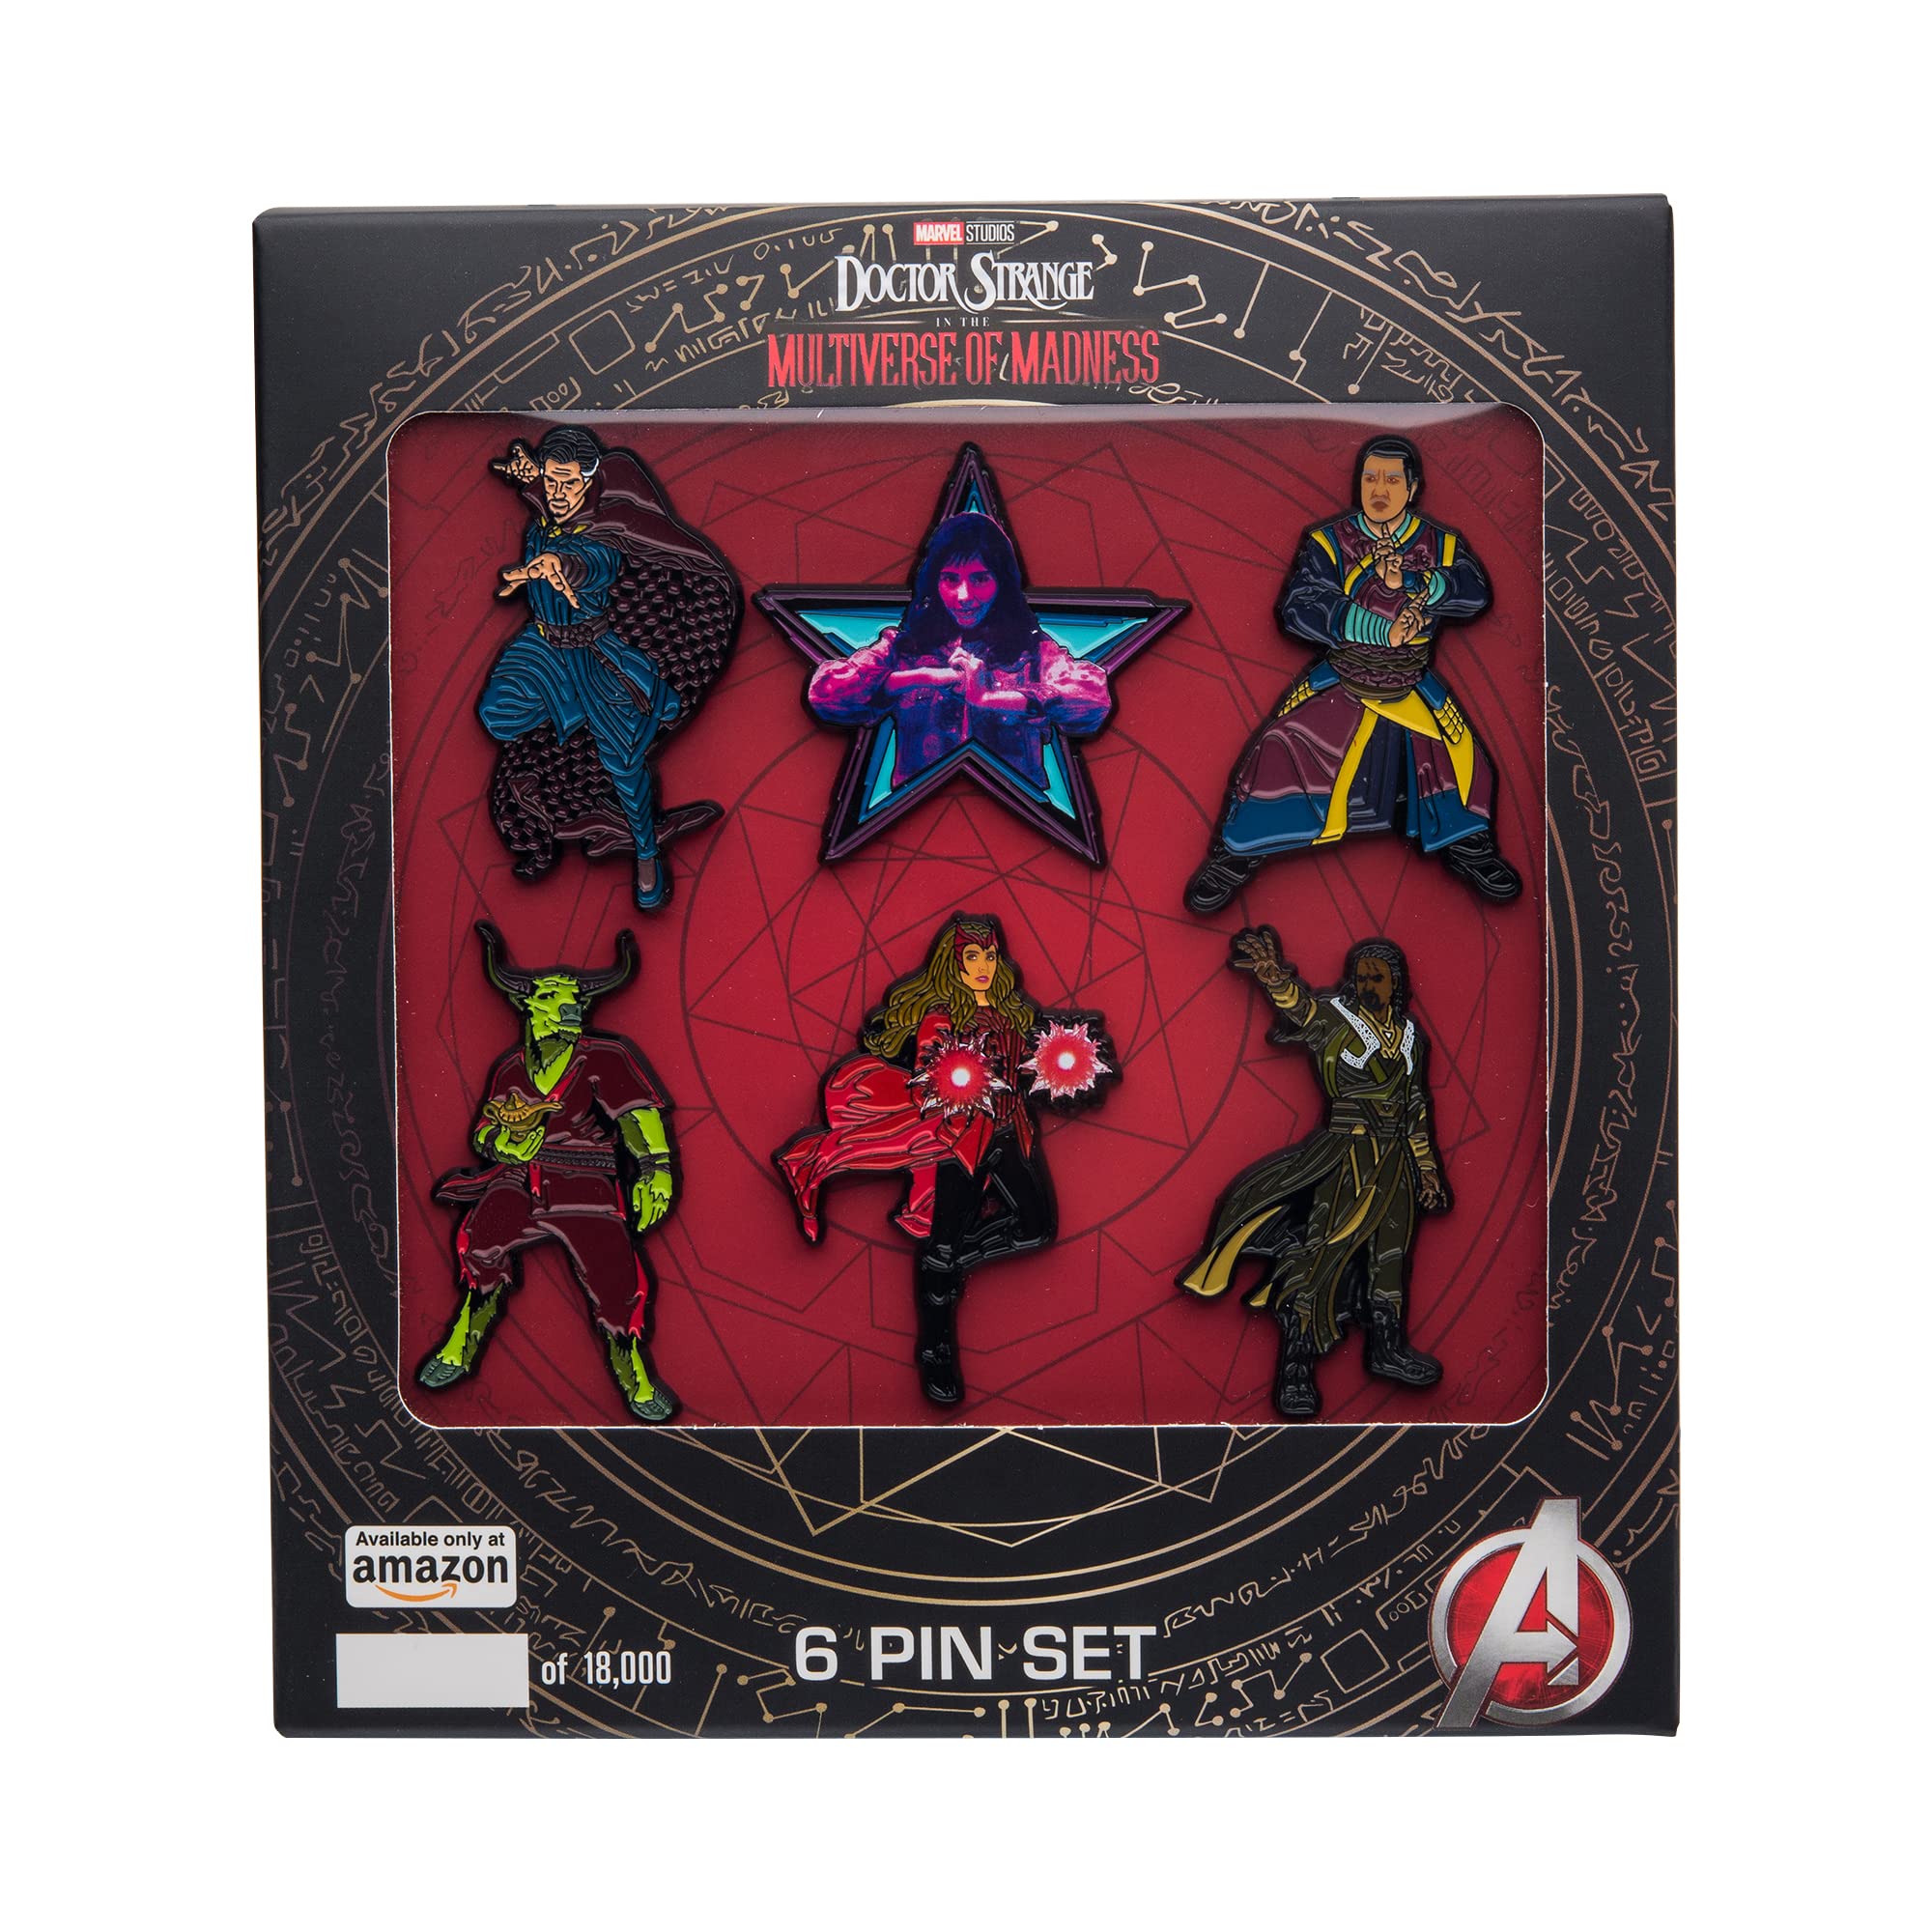 Marvel Studios: Doctor Strange in the Multiverse of Madness. Metal-based with 6 Pin Set comes in an Officially Licensed Box (Amazon Exclusive)